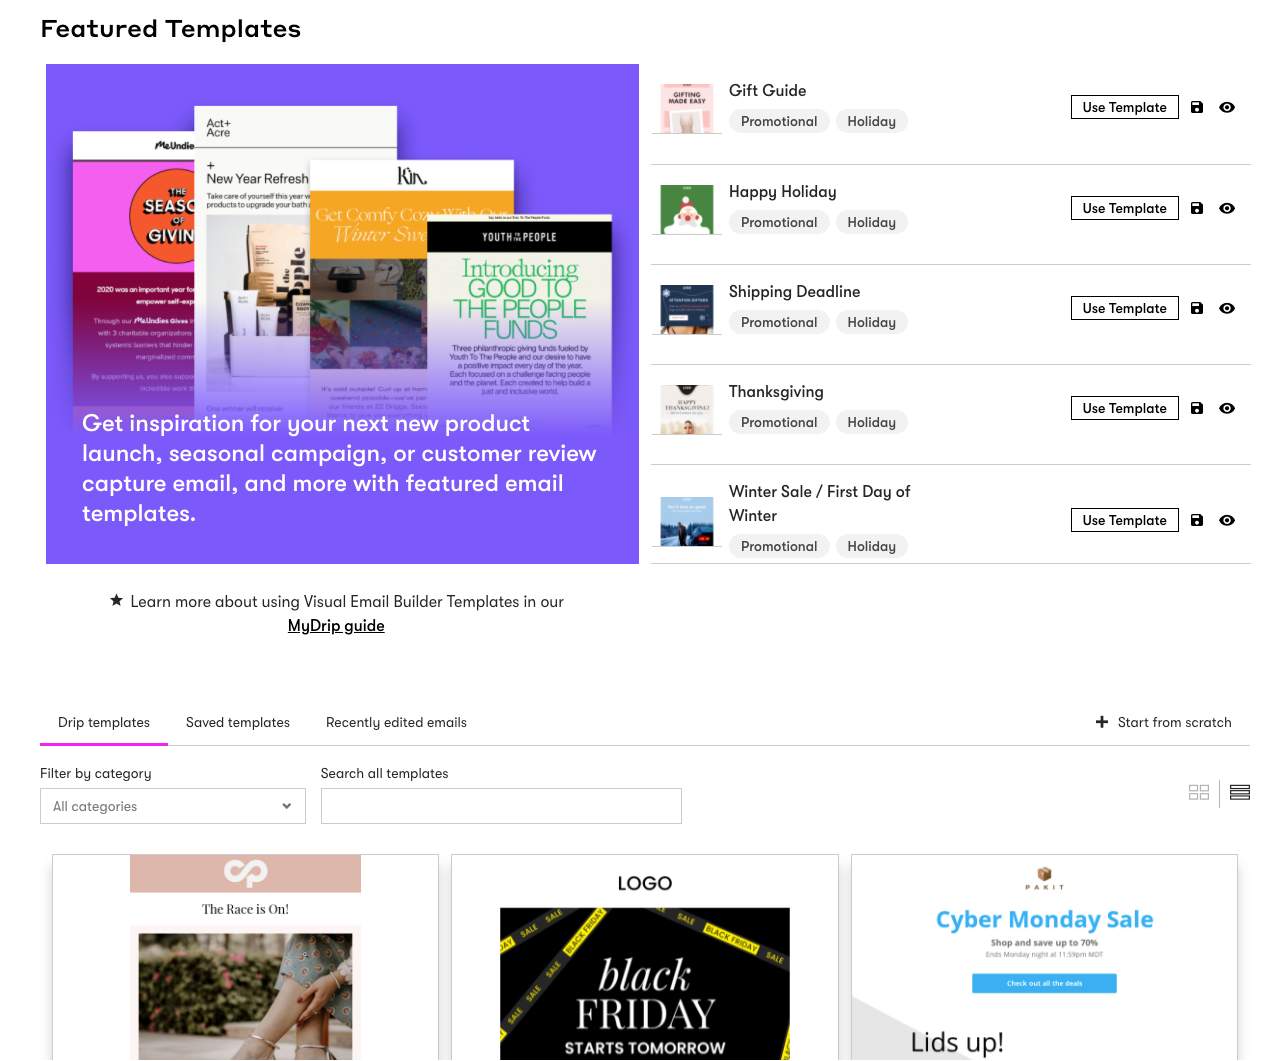 Visual Email Builder Templates